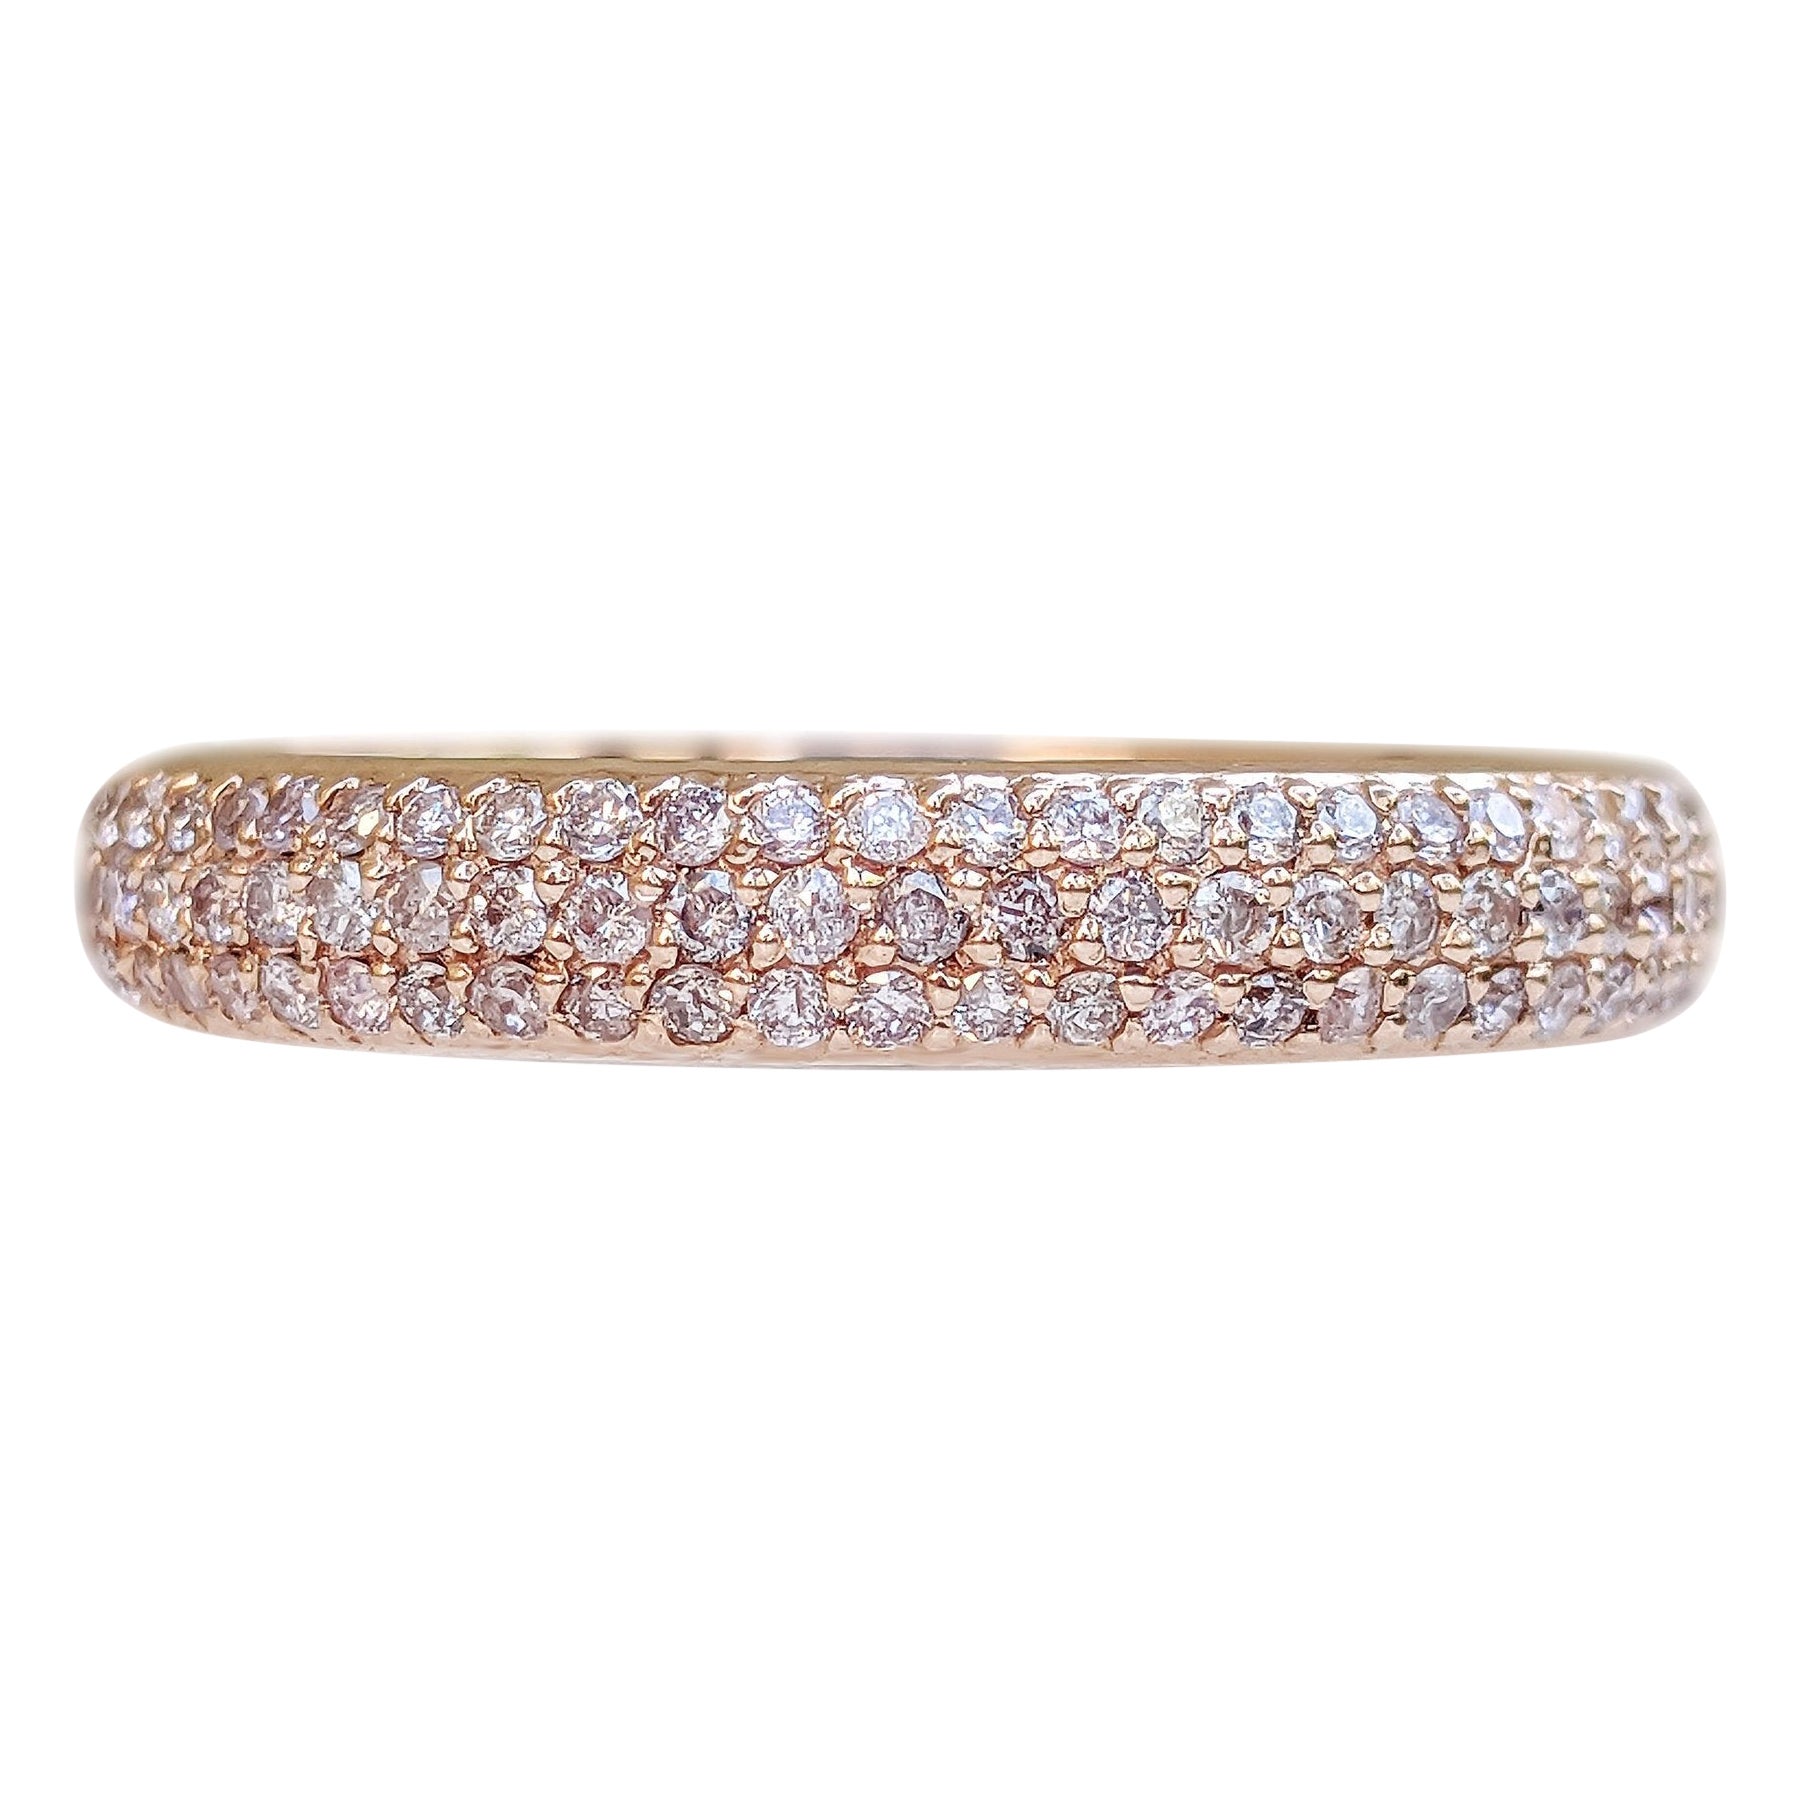 NO RESERVE! 1.01Ct Fancy Diamonds Eternity Band - 14 kt. Rose gold - Ring For Sale